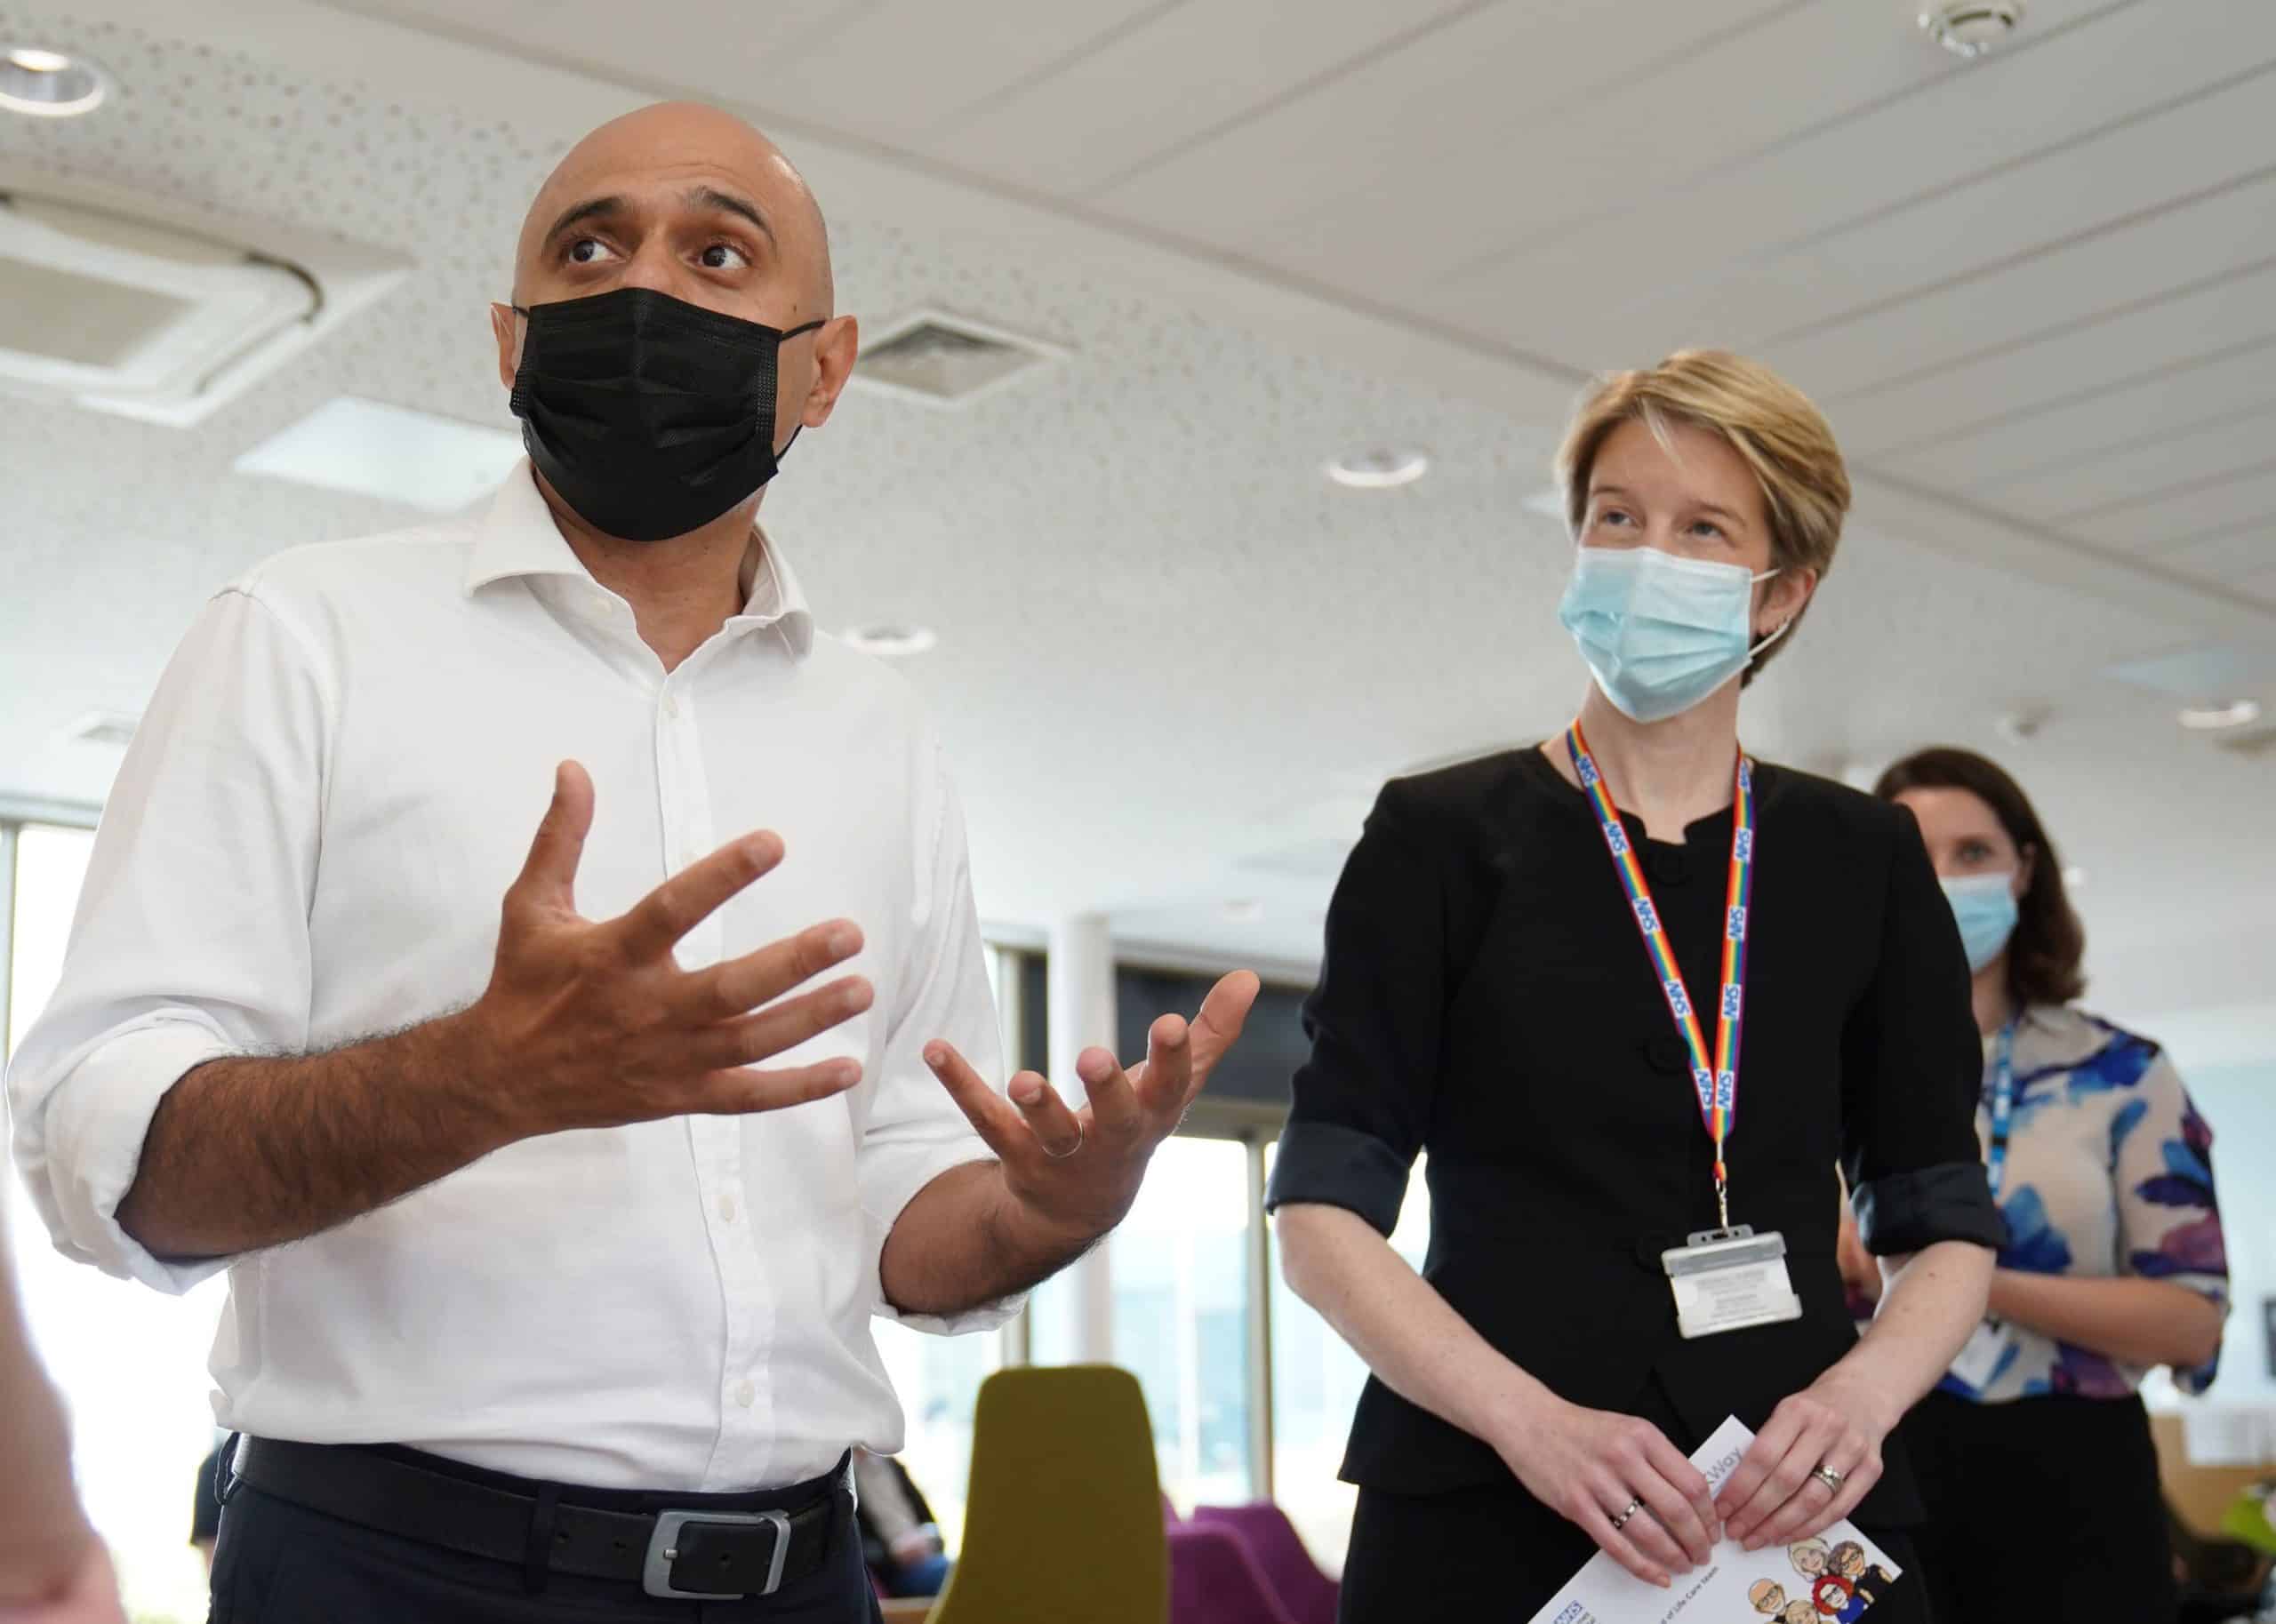 GP confronts Javid: ‘Who runs the NHS, you or the Daily Mail?’